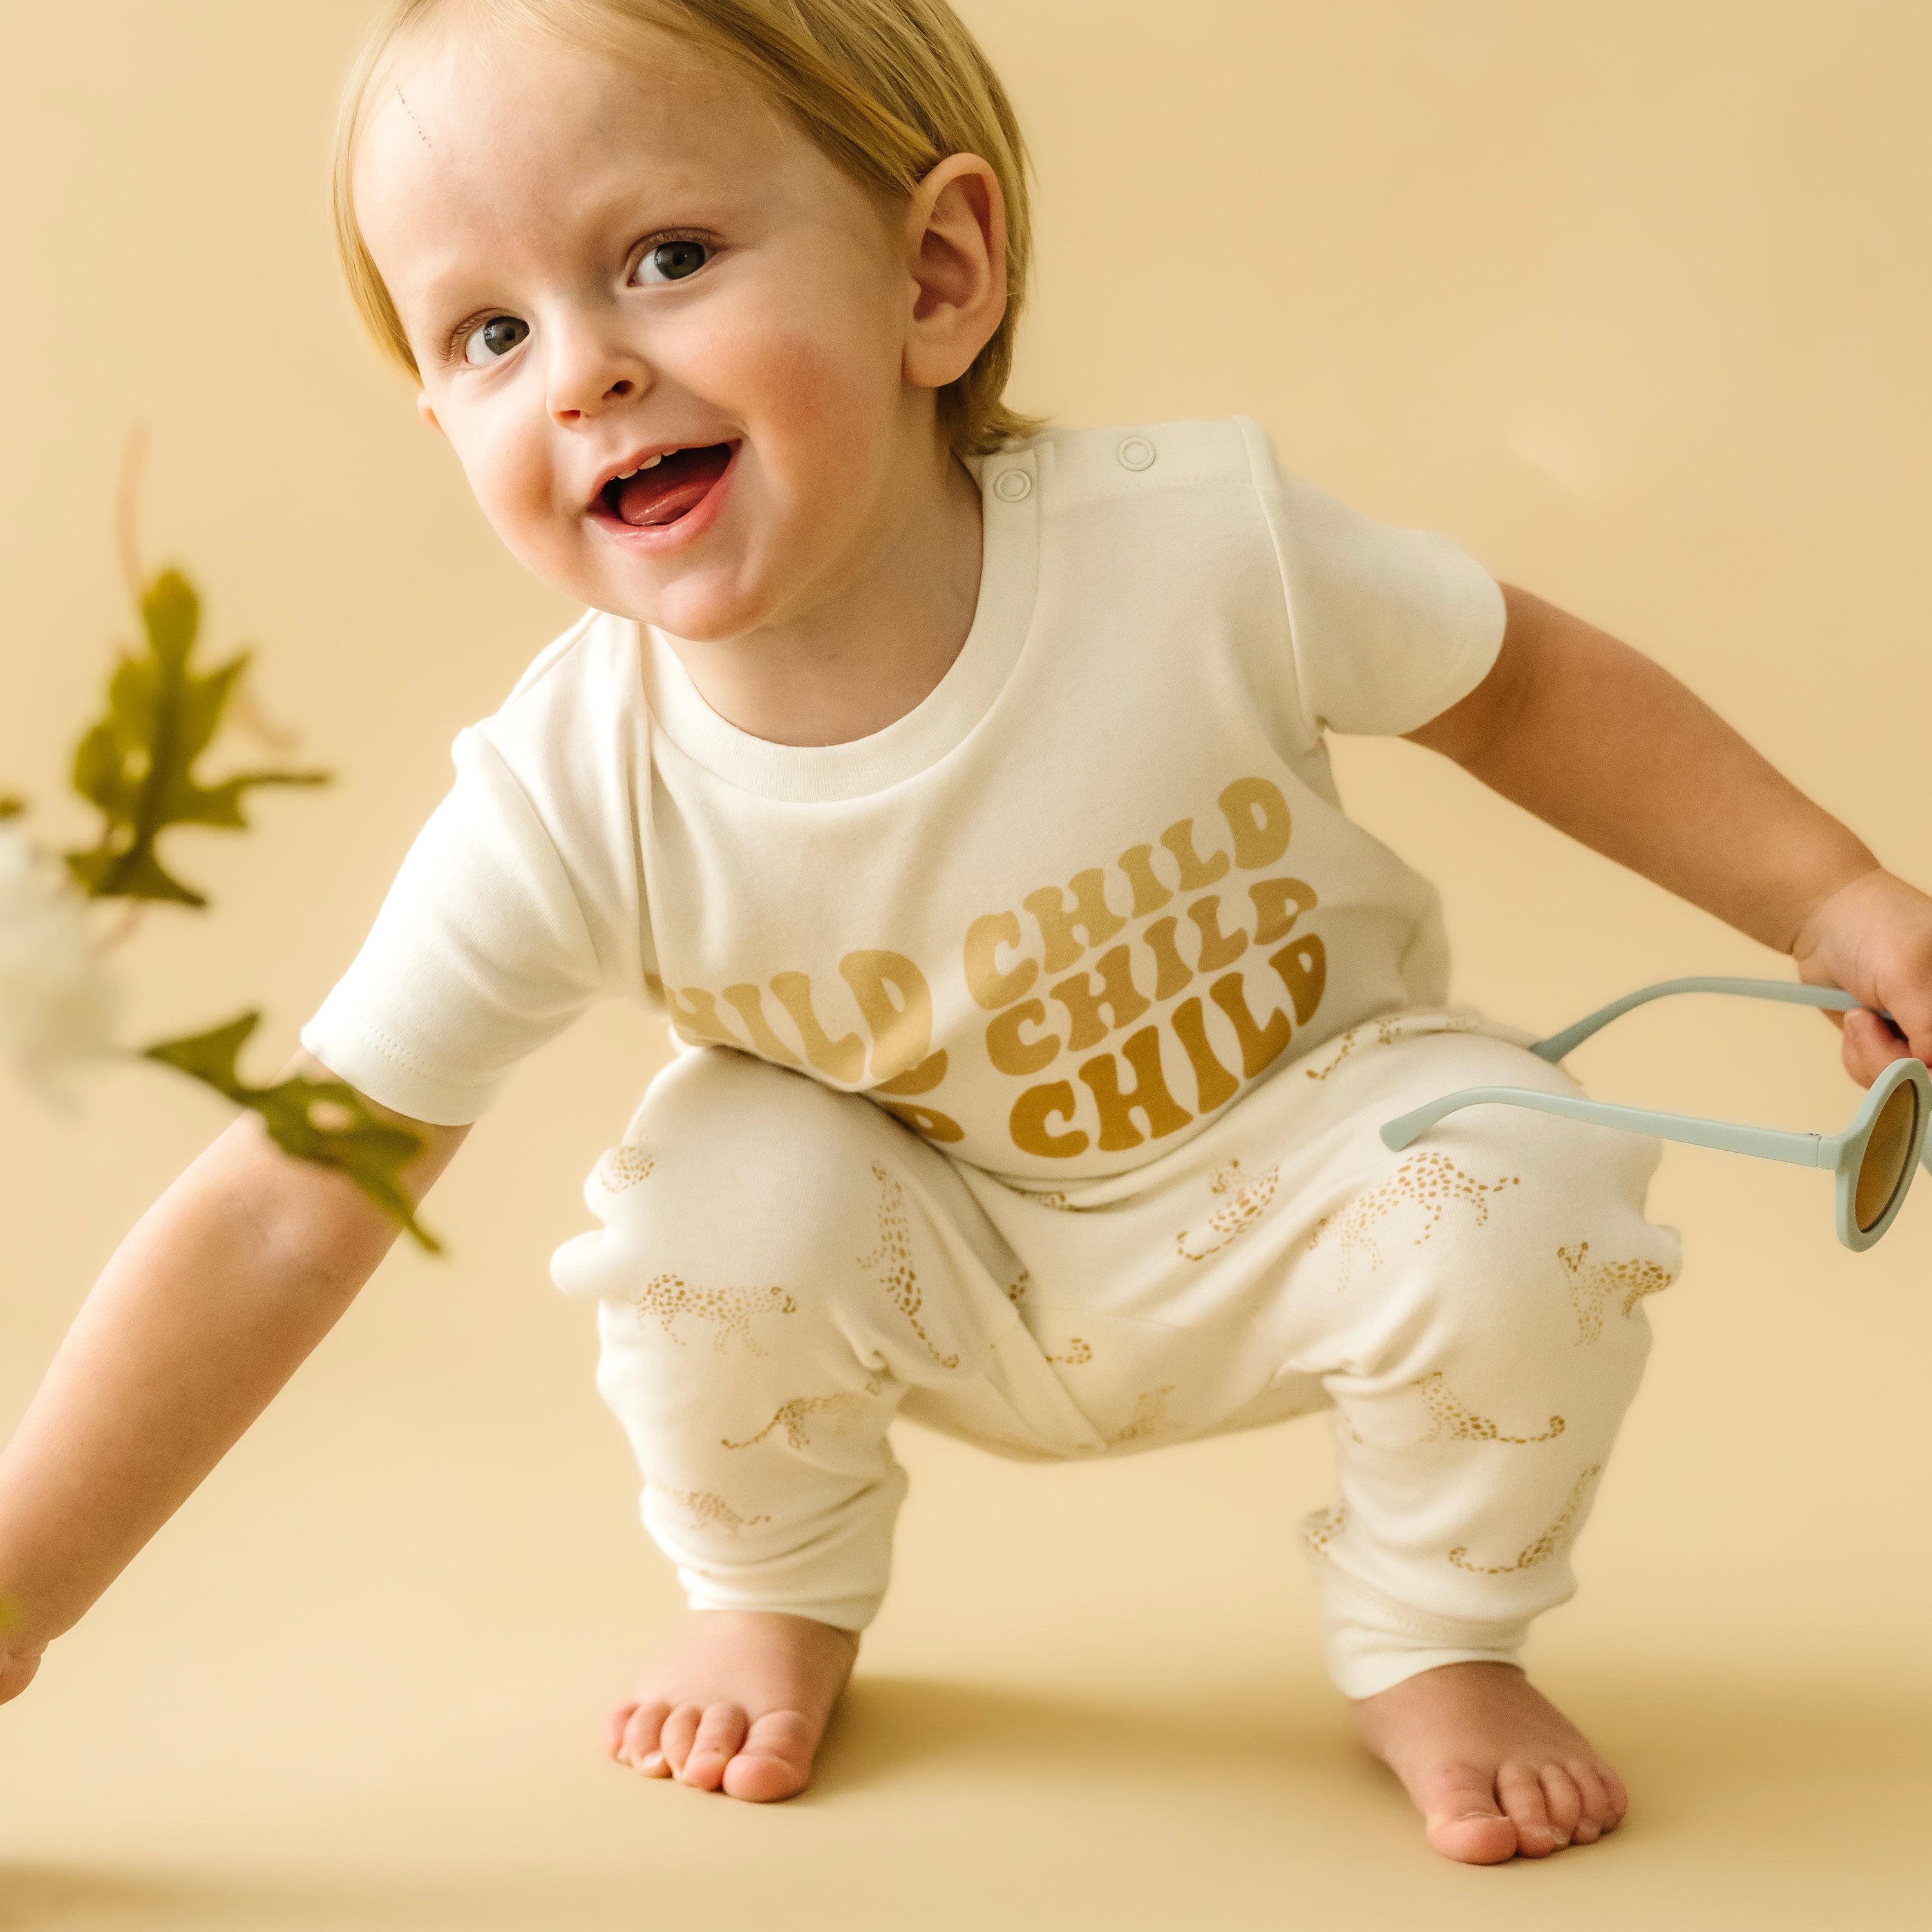 A joyful toddler in a white outfit from Organic Kids with an Organic Tee & Pants Set - Wild Child printed on it, smiling and playing with a blue toy watering can, against a soft beige background.